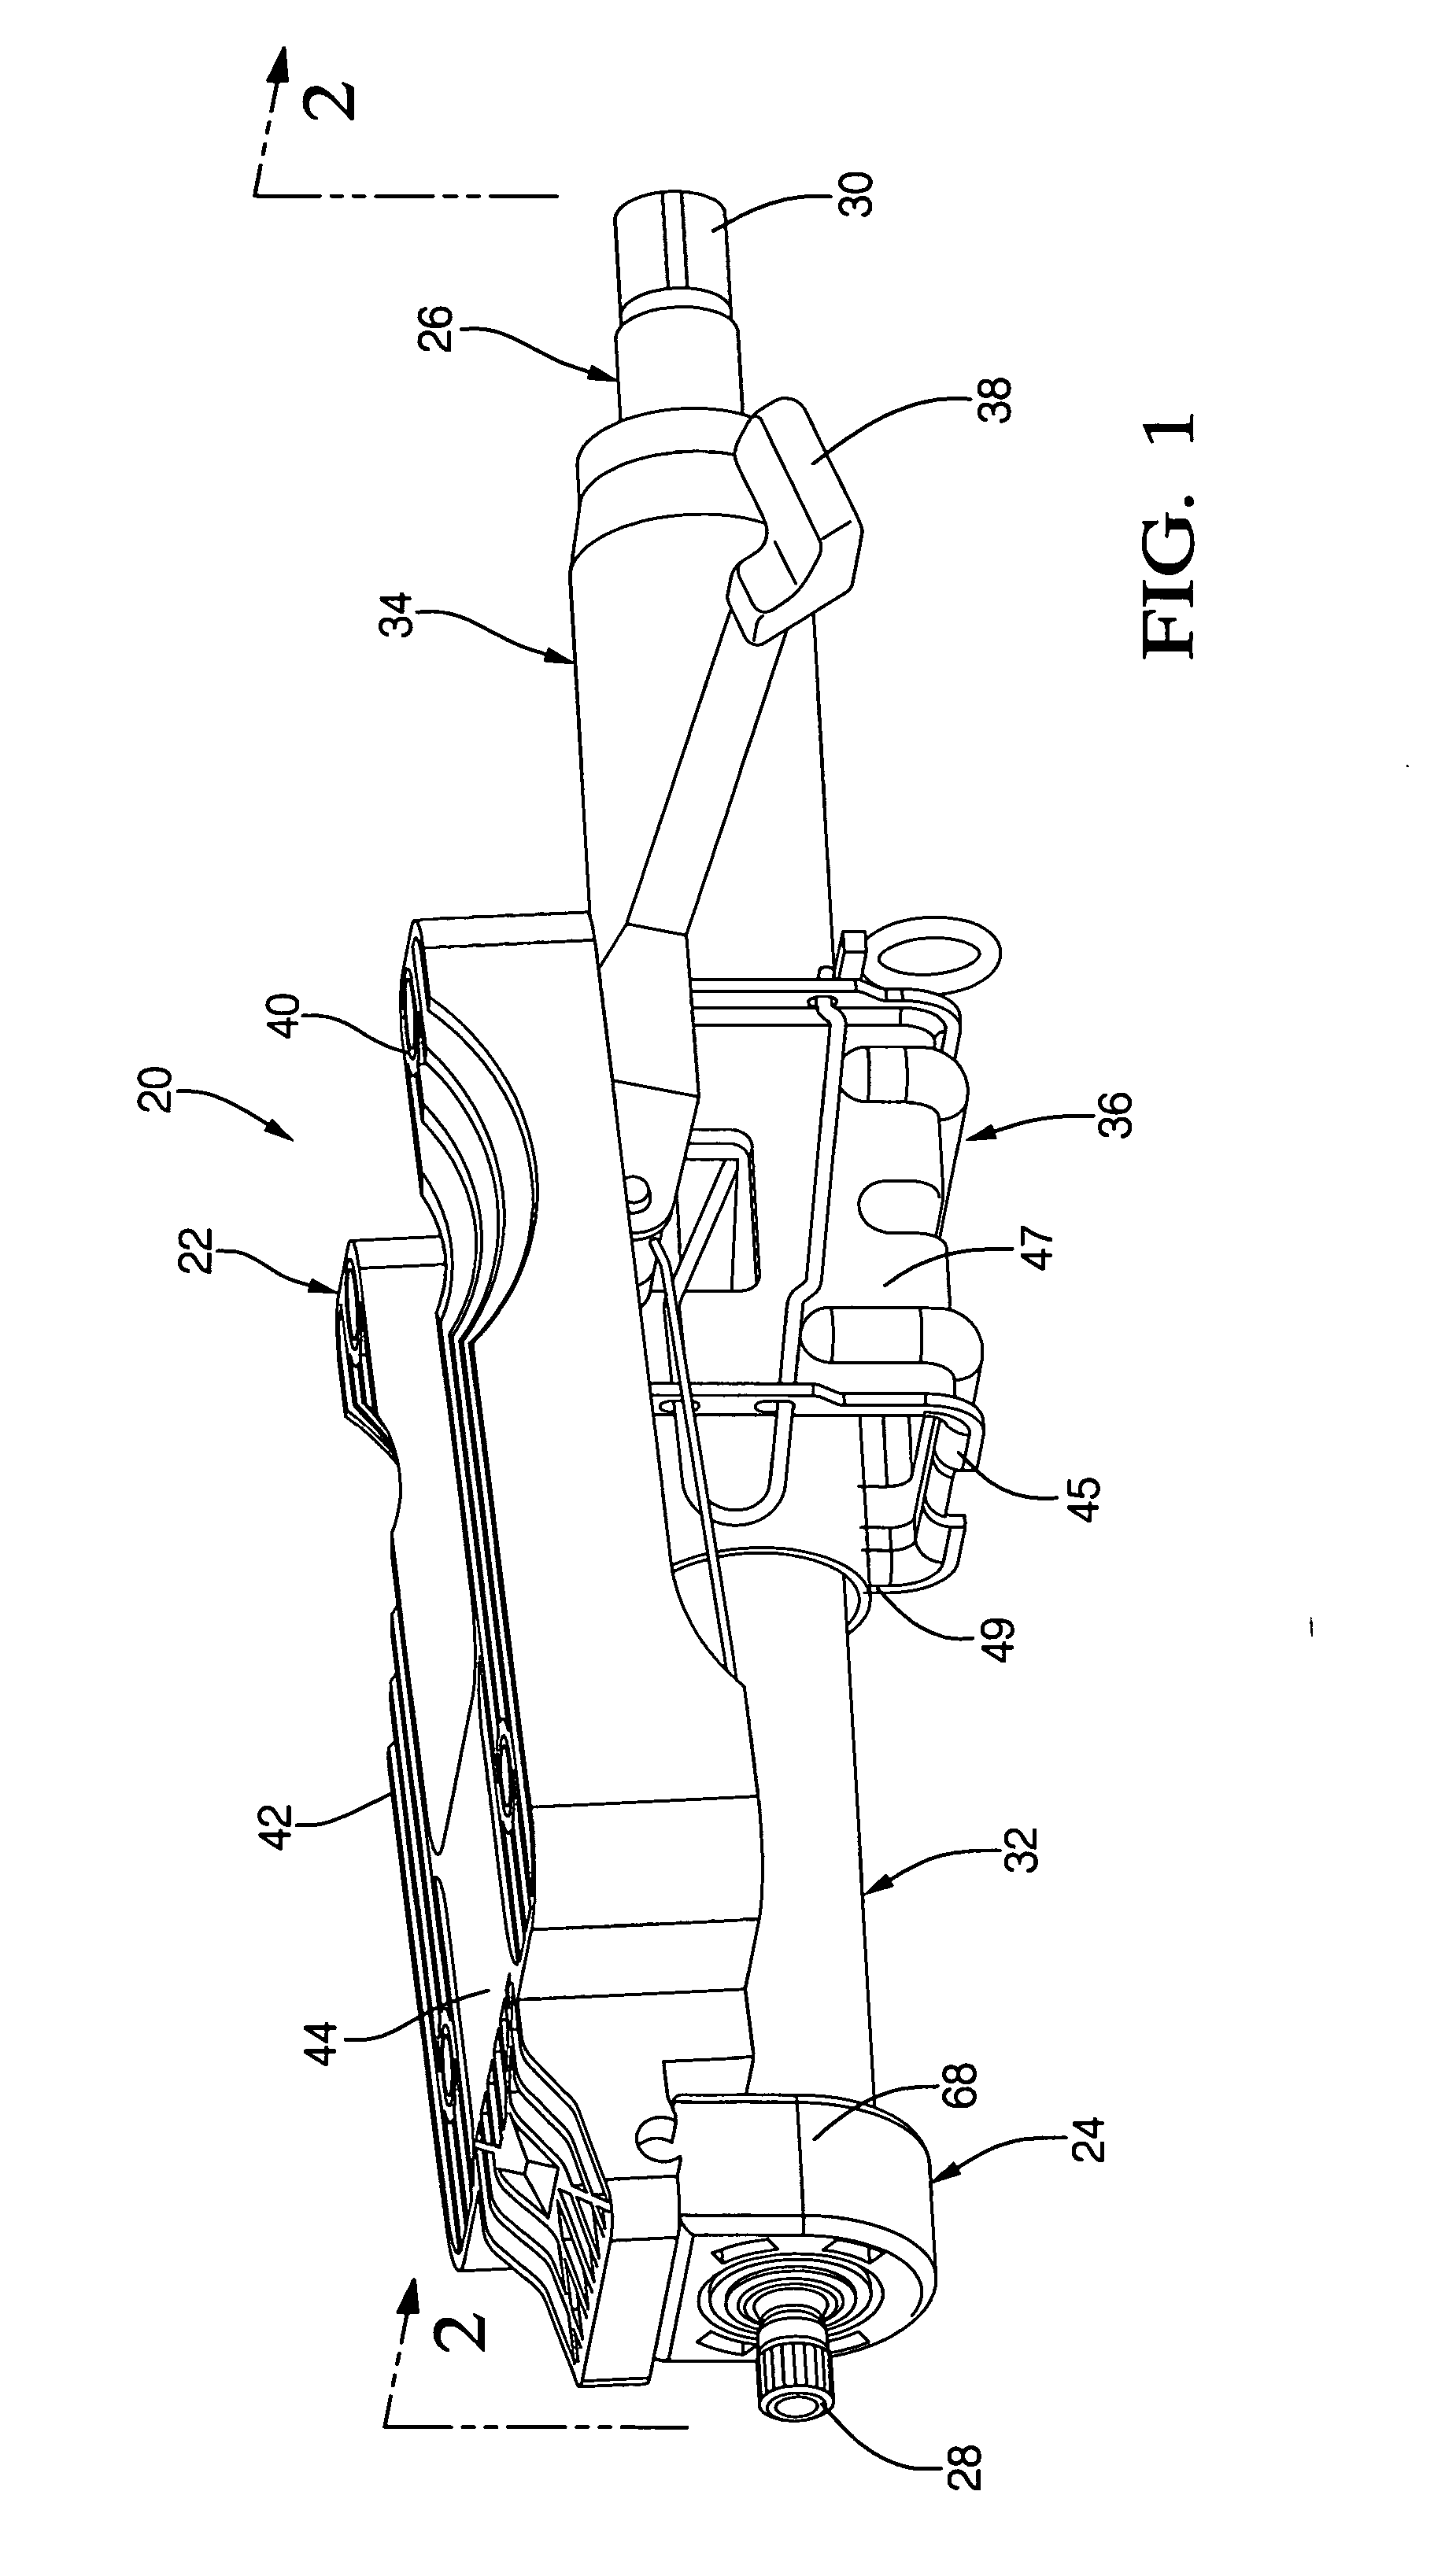 Steering column assembly for a vehicle